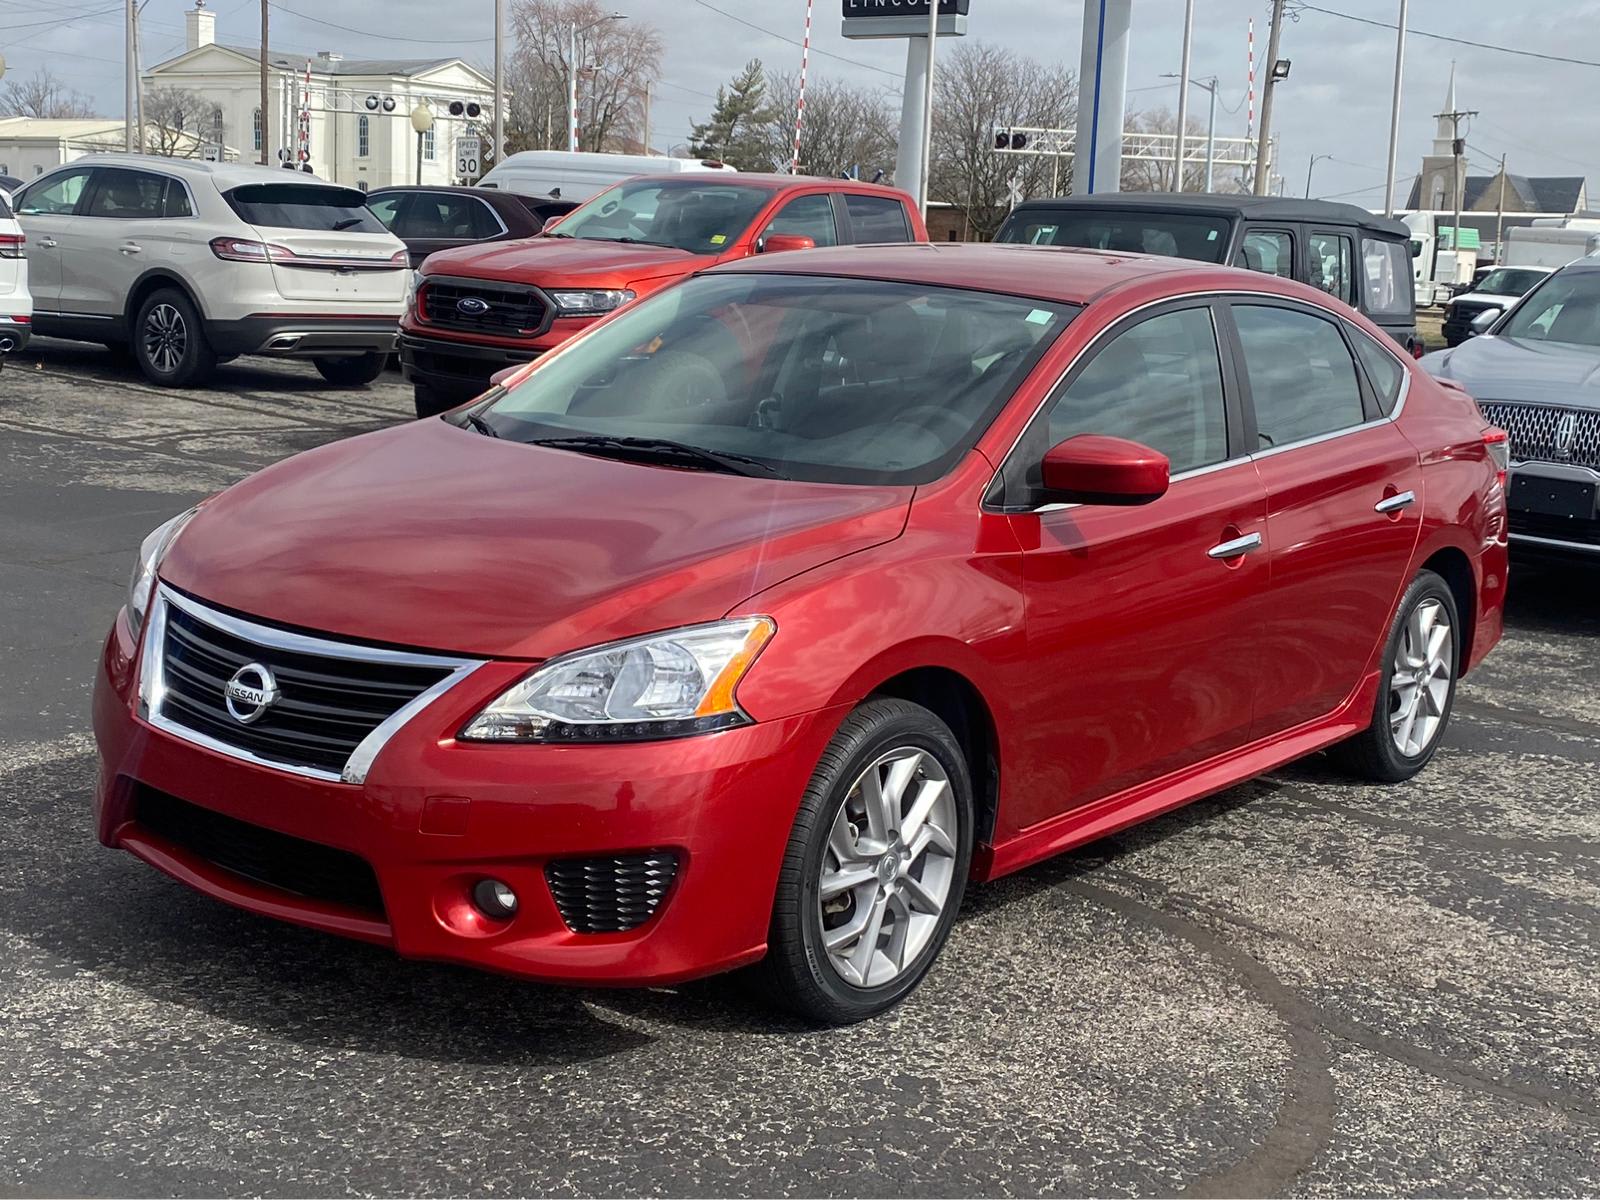 Used 2014 Nissan Sentra SR with VIN 3N1AB7AP0EY323872 for sale in Mount Vernon, IL